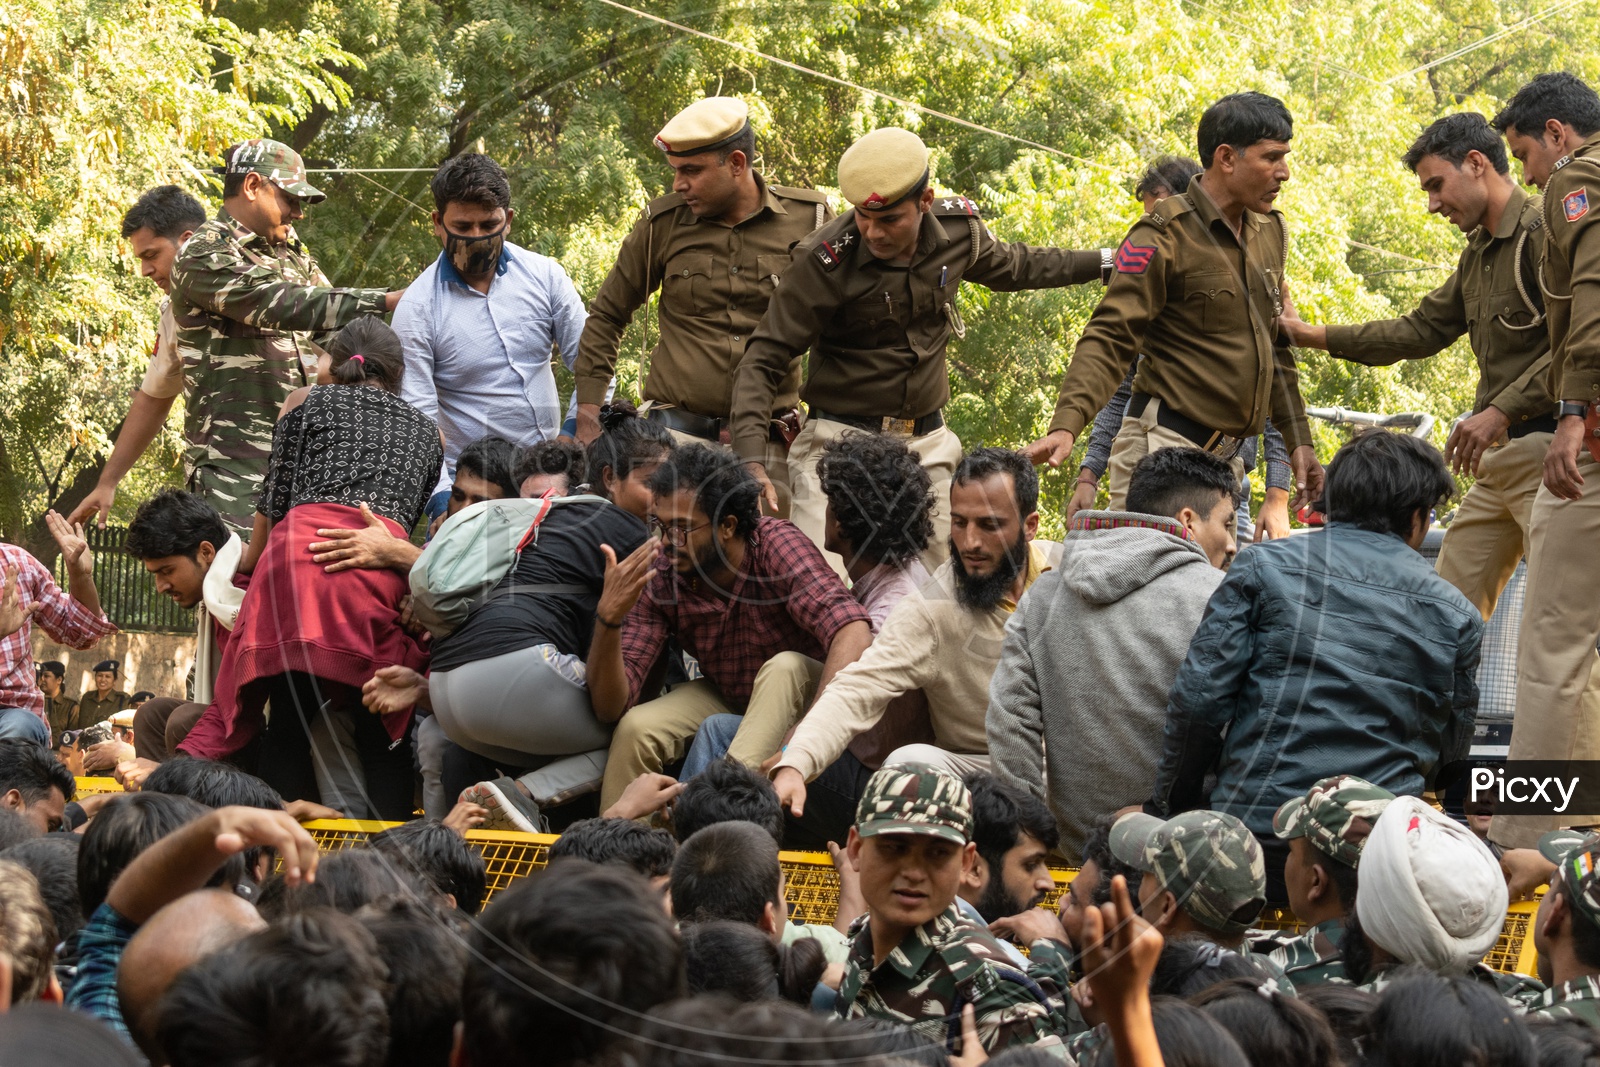 JNU(Jawaharlal Nehru University) students protesting against fee hike, 'National Education Policy 2019' (NEP) and other issues related to Education during a march to parliament and Delhi police personnel and CRPF Jawans trying to stop them